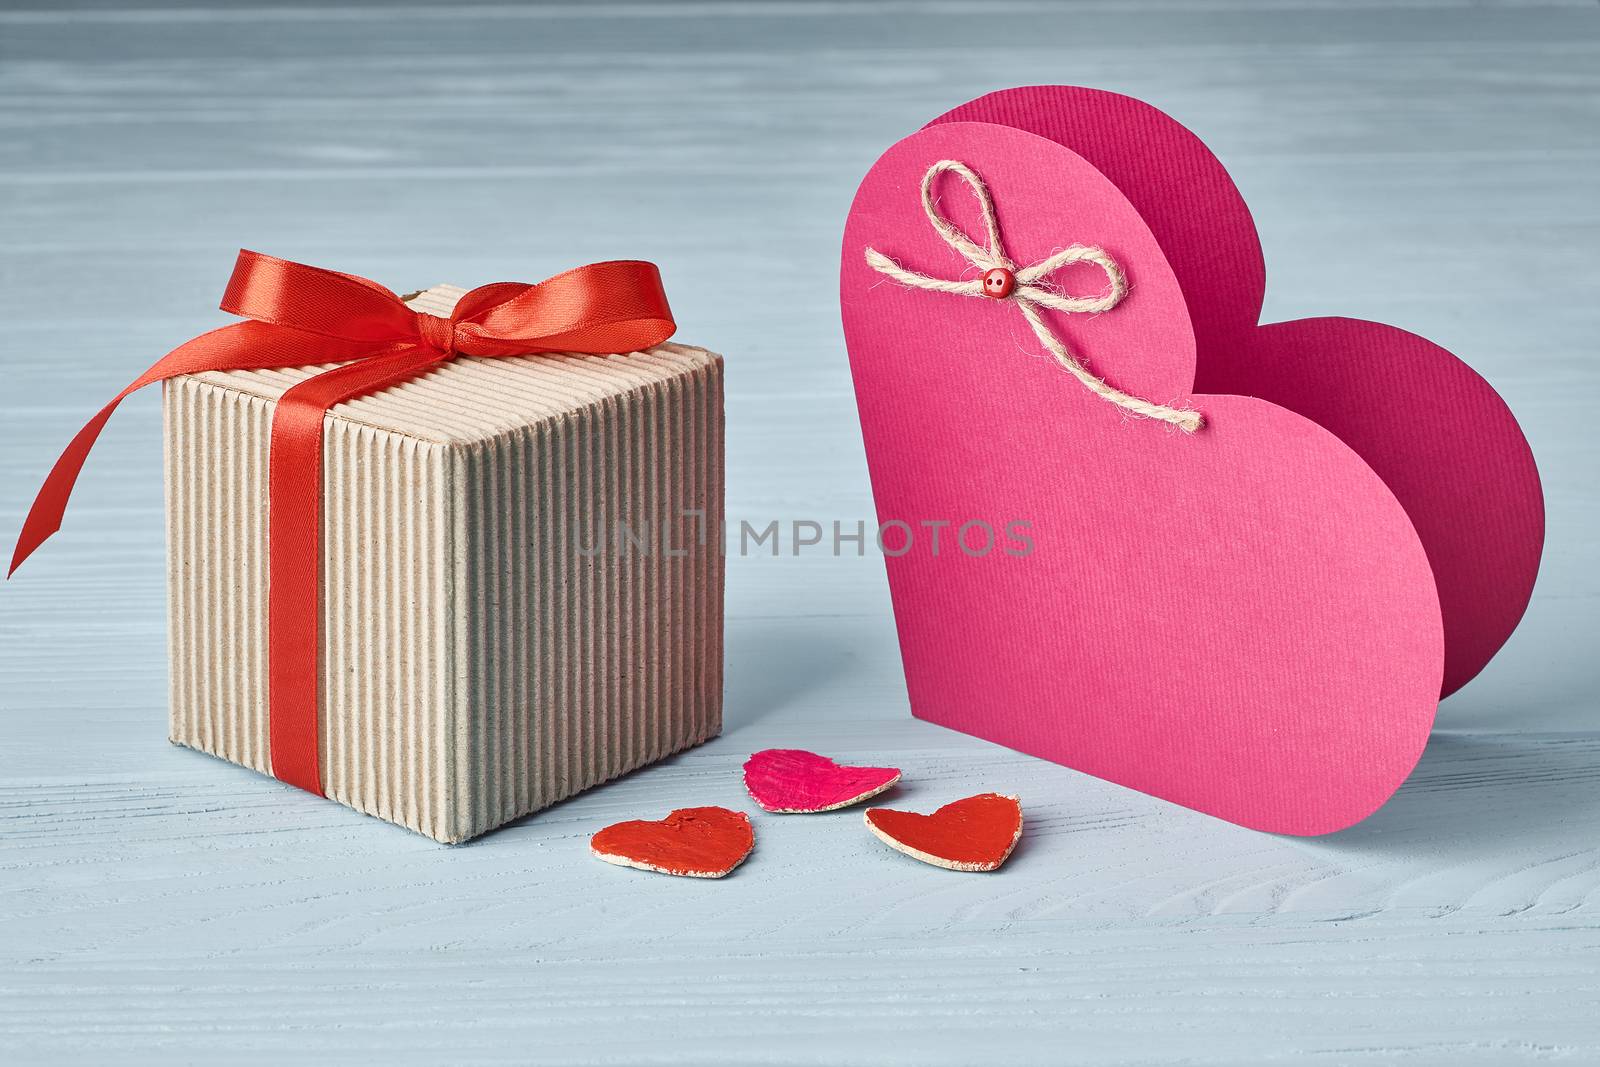 Valentines Day. Love hearts, gift box on wood by 918